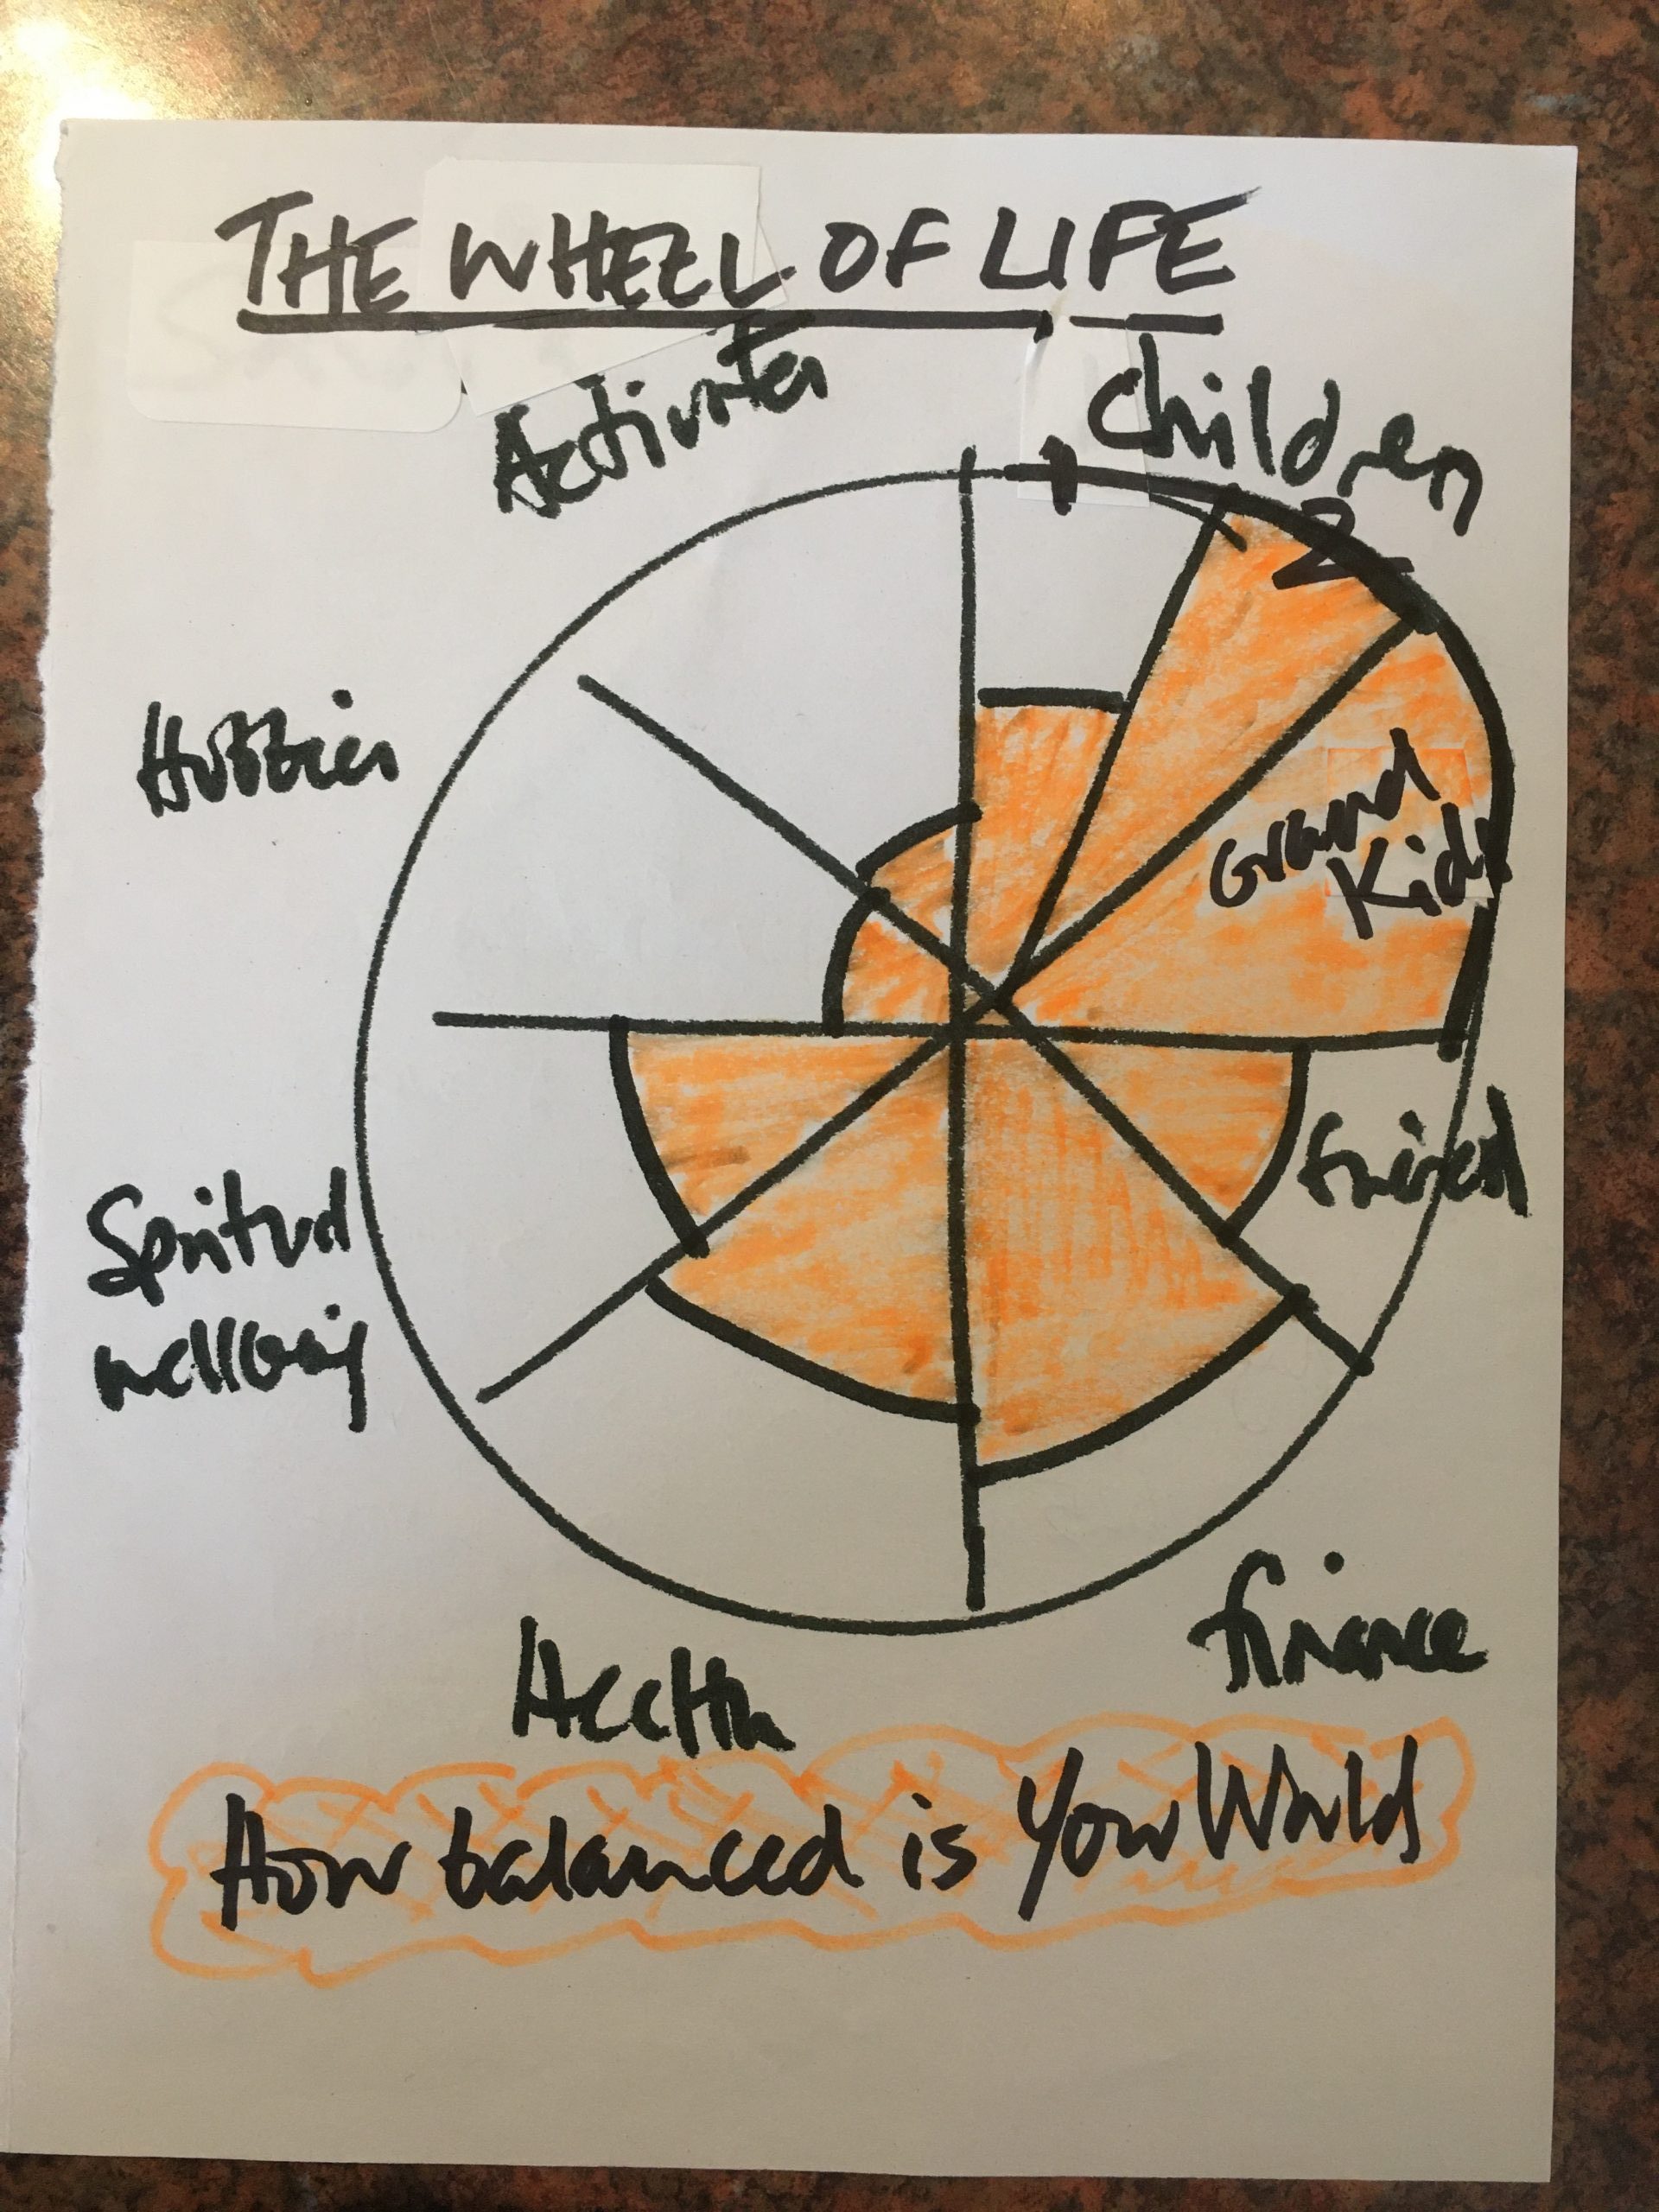 Work on a wheel of life to establish the areas that are important to you in your life and where there is an imbalance and so what needs to be worked on